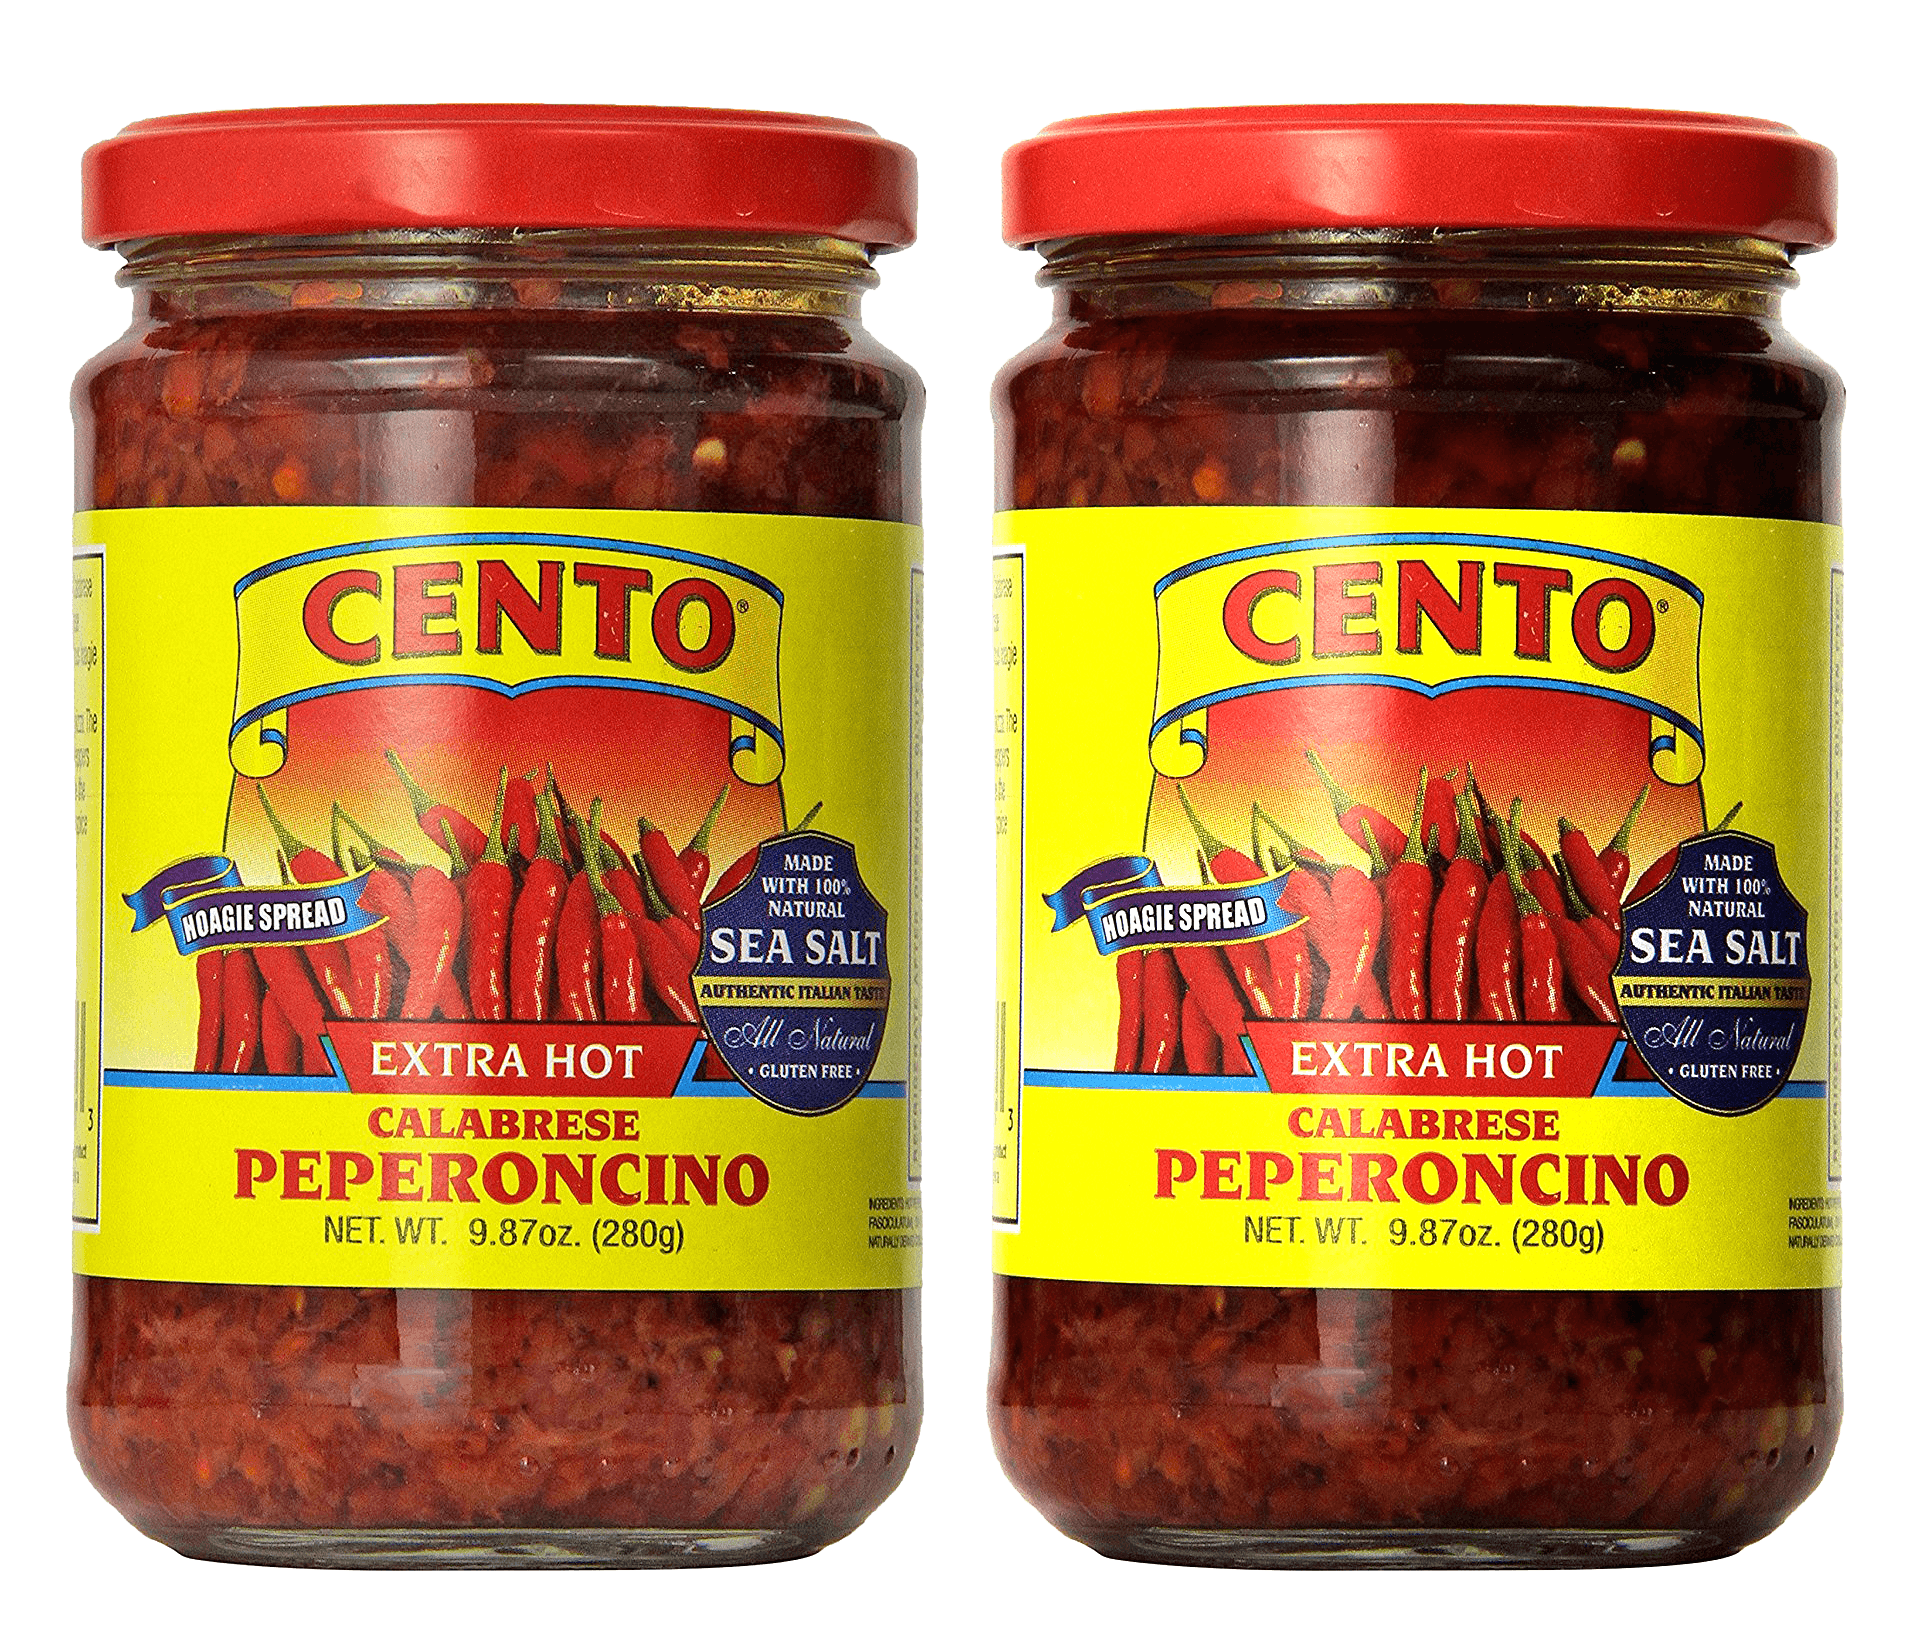 Cento Products - Cento - Extra Hot Calabrese Peperoncino Hoagie Spread 2 Pack - Free Shipping